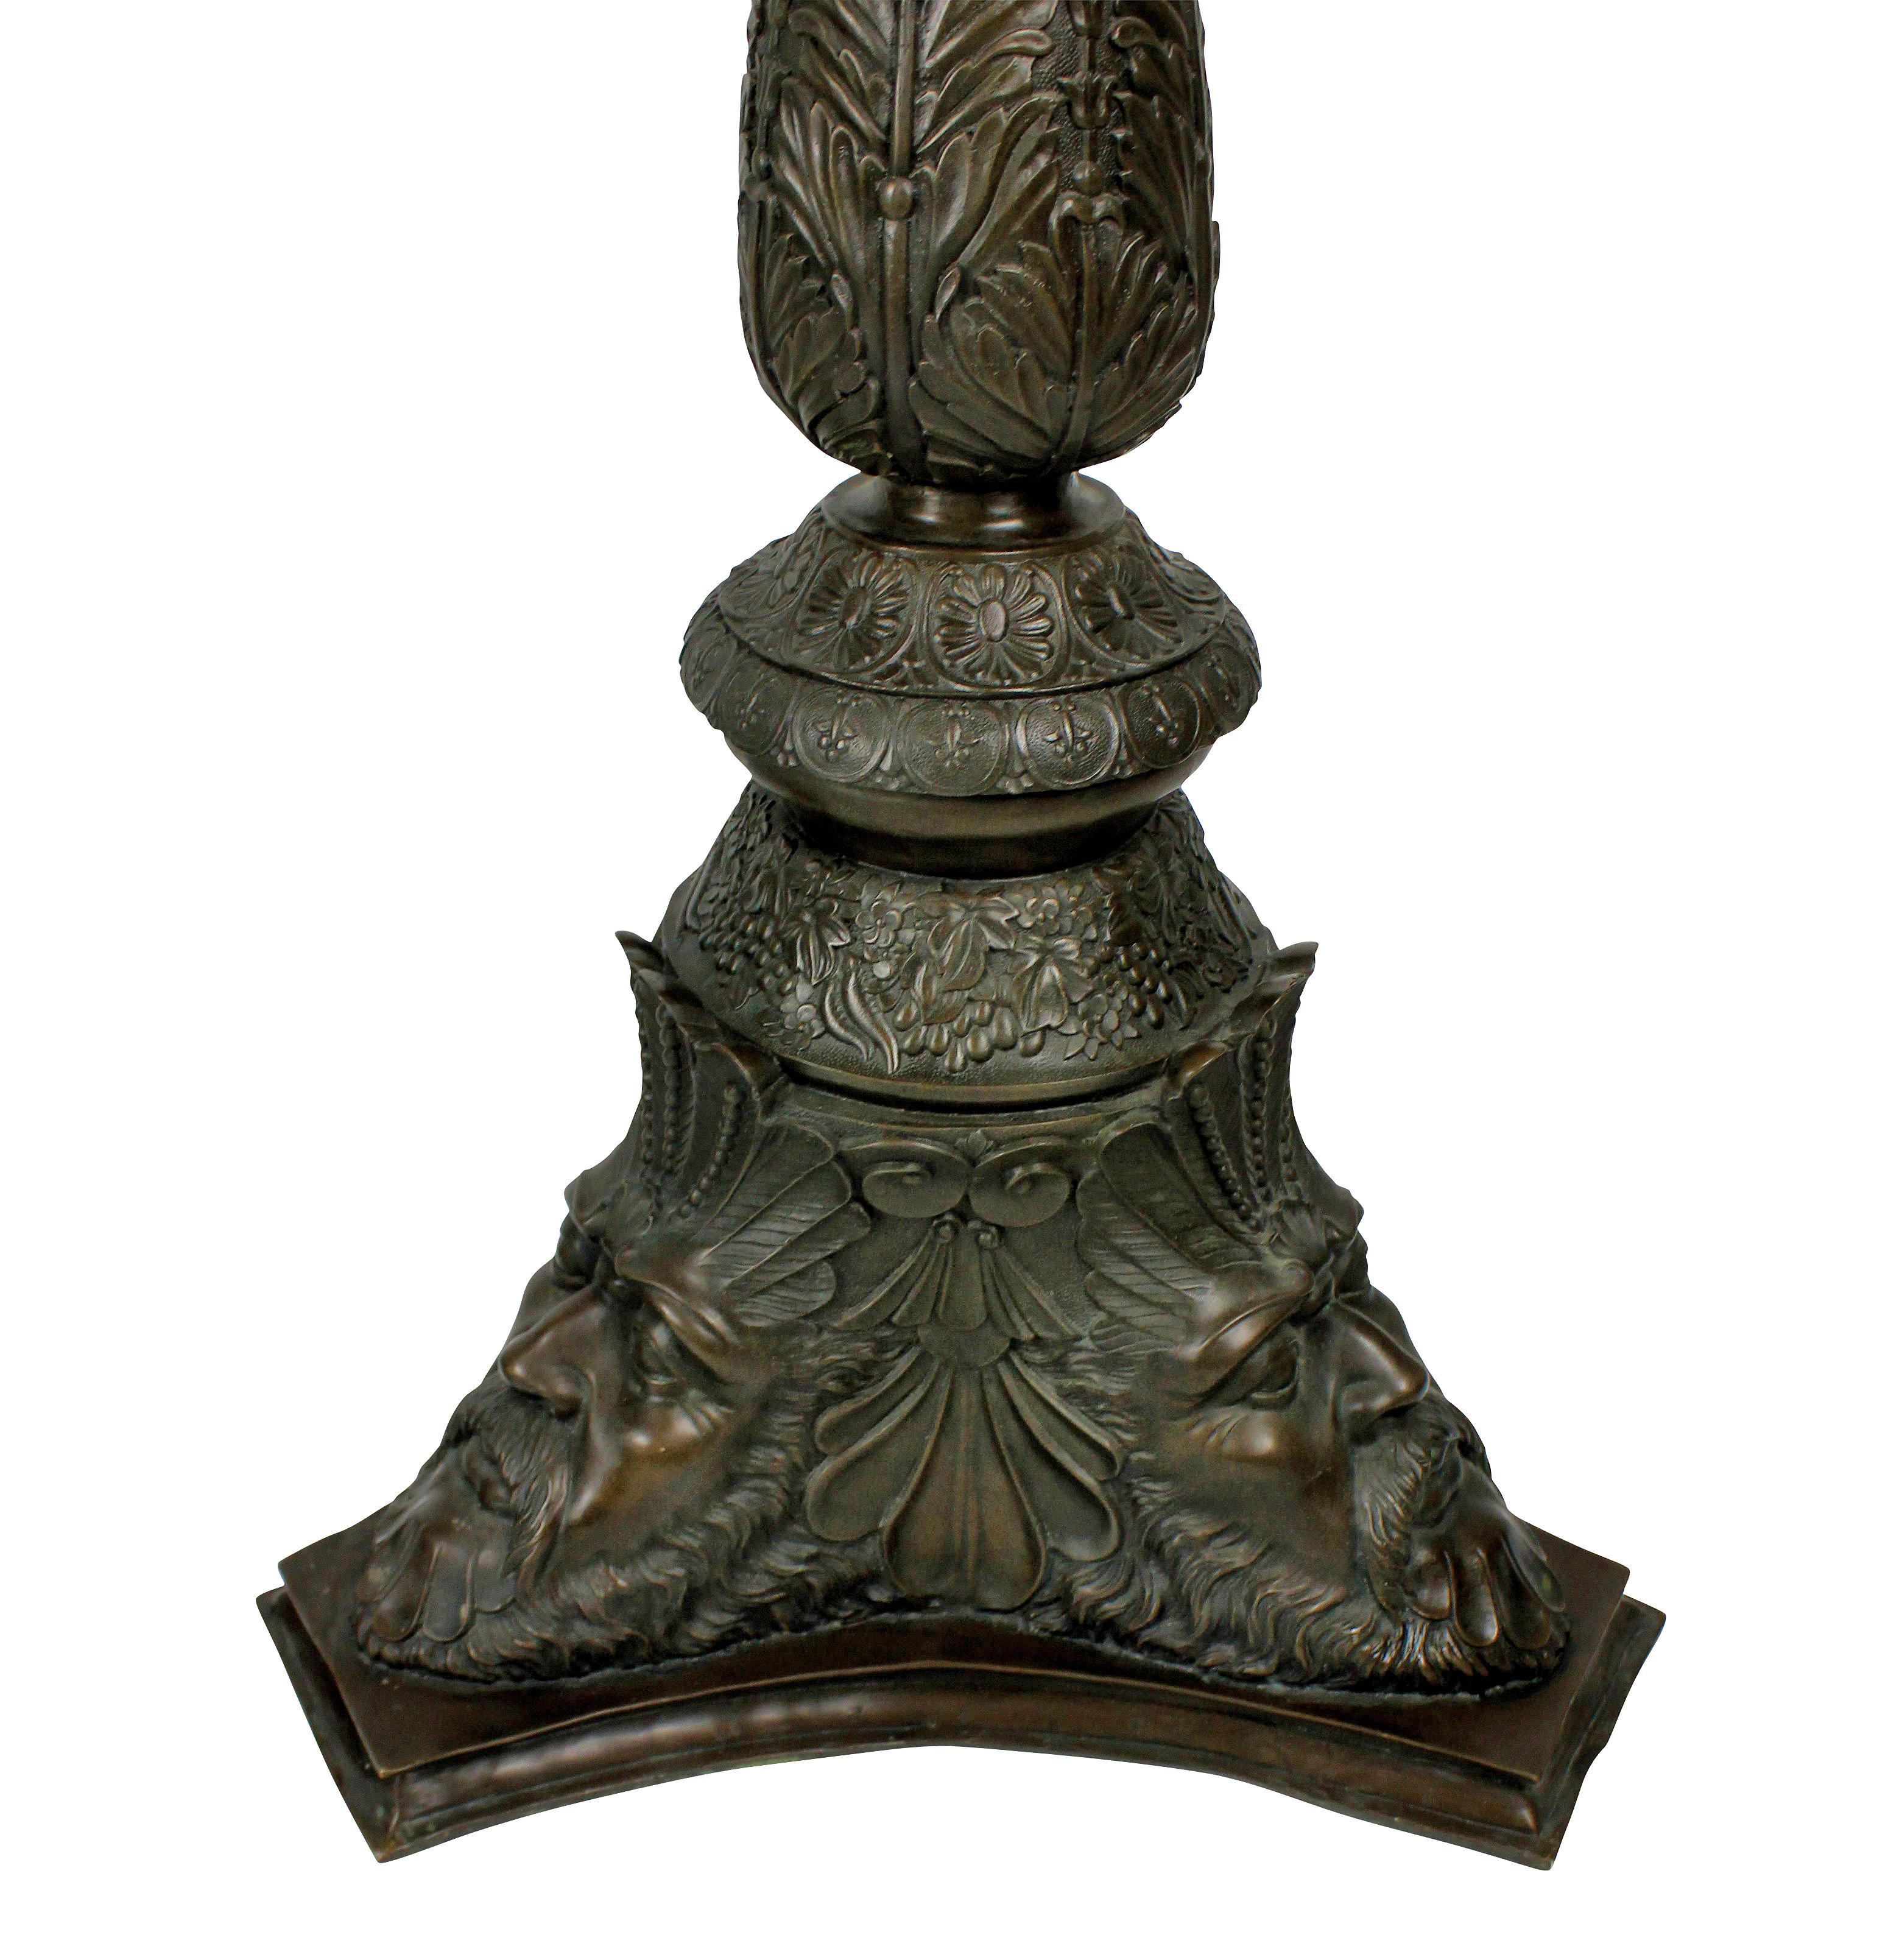 A rare and beautifully cast pair of Venetian solid bronze torchere pedestals, in the Classical manner, with acanthus, anthemion and masks, with good patina.